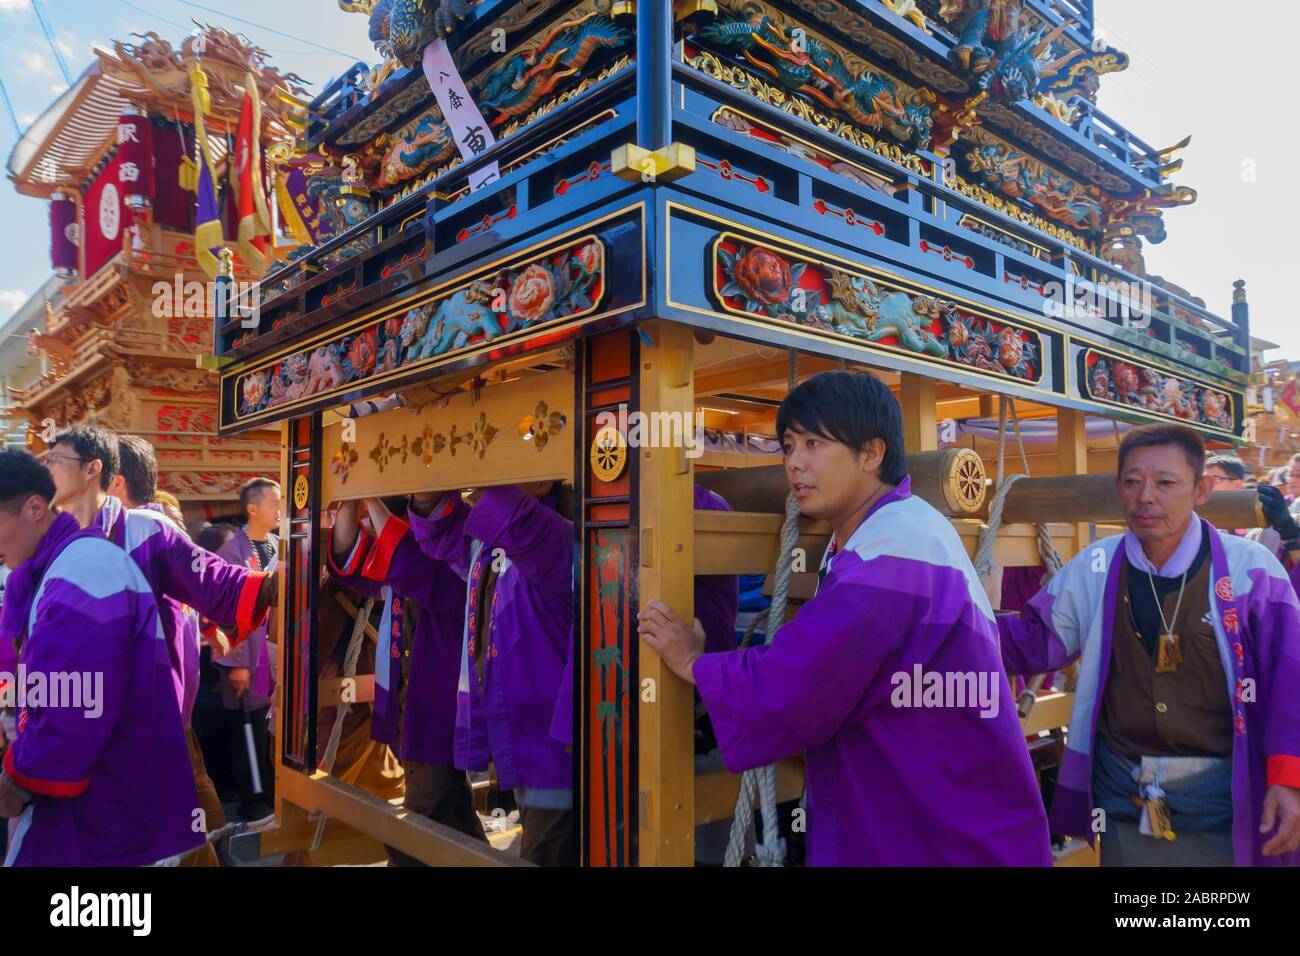 Saijo, Japan - October 16, 2019: Parade with participants carrying Danjiri floats (portable shrines), in the streets of the city center. Saijo Isono S Stock Photo